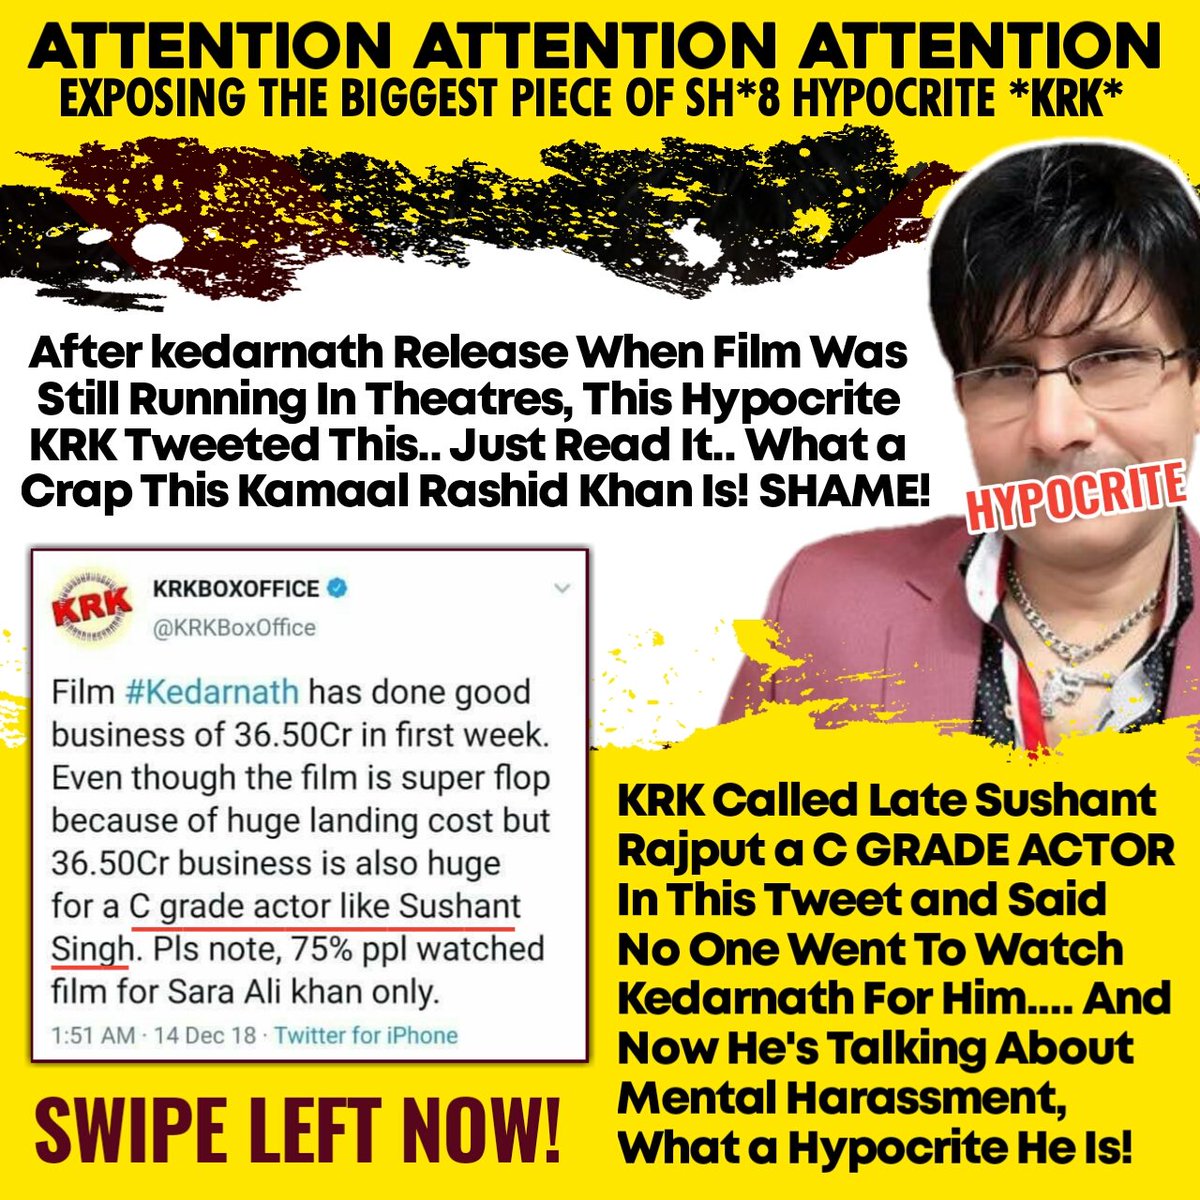 EXPOSING KRK - 2After SSR's Movie Kedarnath Released, This Hypocrite  @kamaalrkhan Tweeted That No One Went To Watch The Movie For Sushant and Called Him a C Grade Actor!WHAT A BULLY and WHAT A SHAME!  #FakeKRKRealCulpritOfSushant